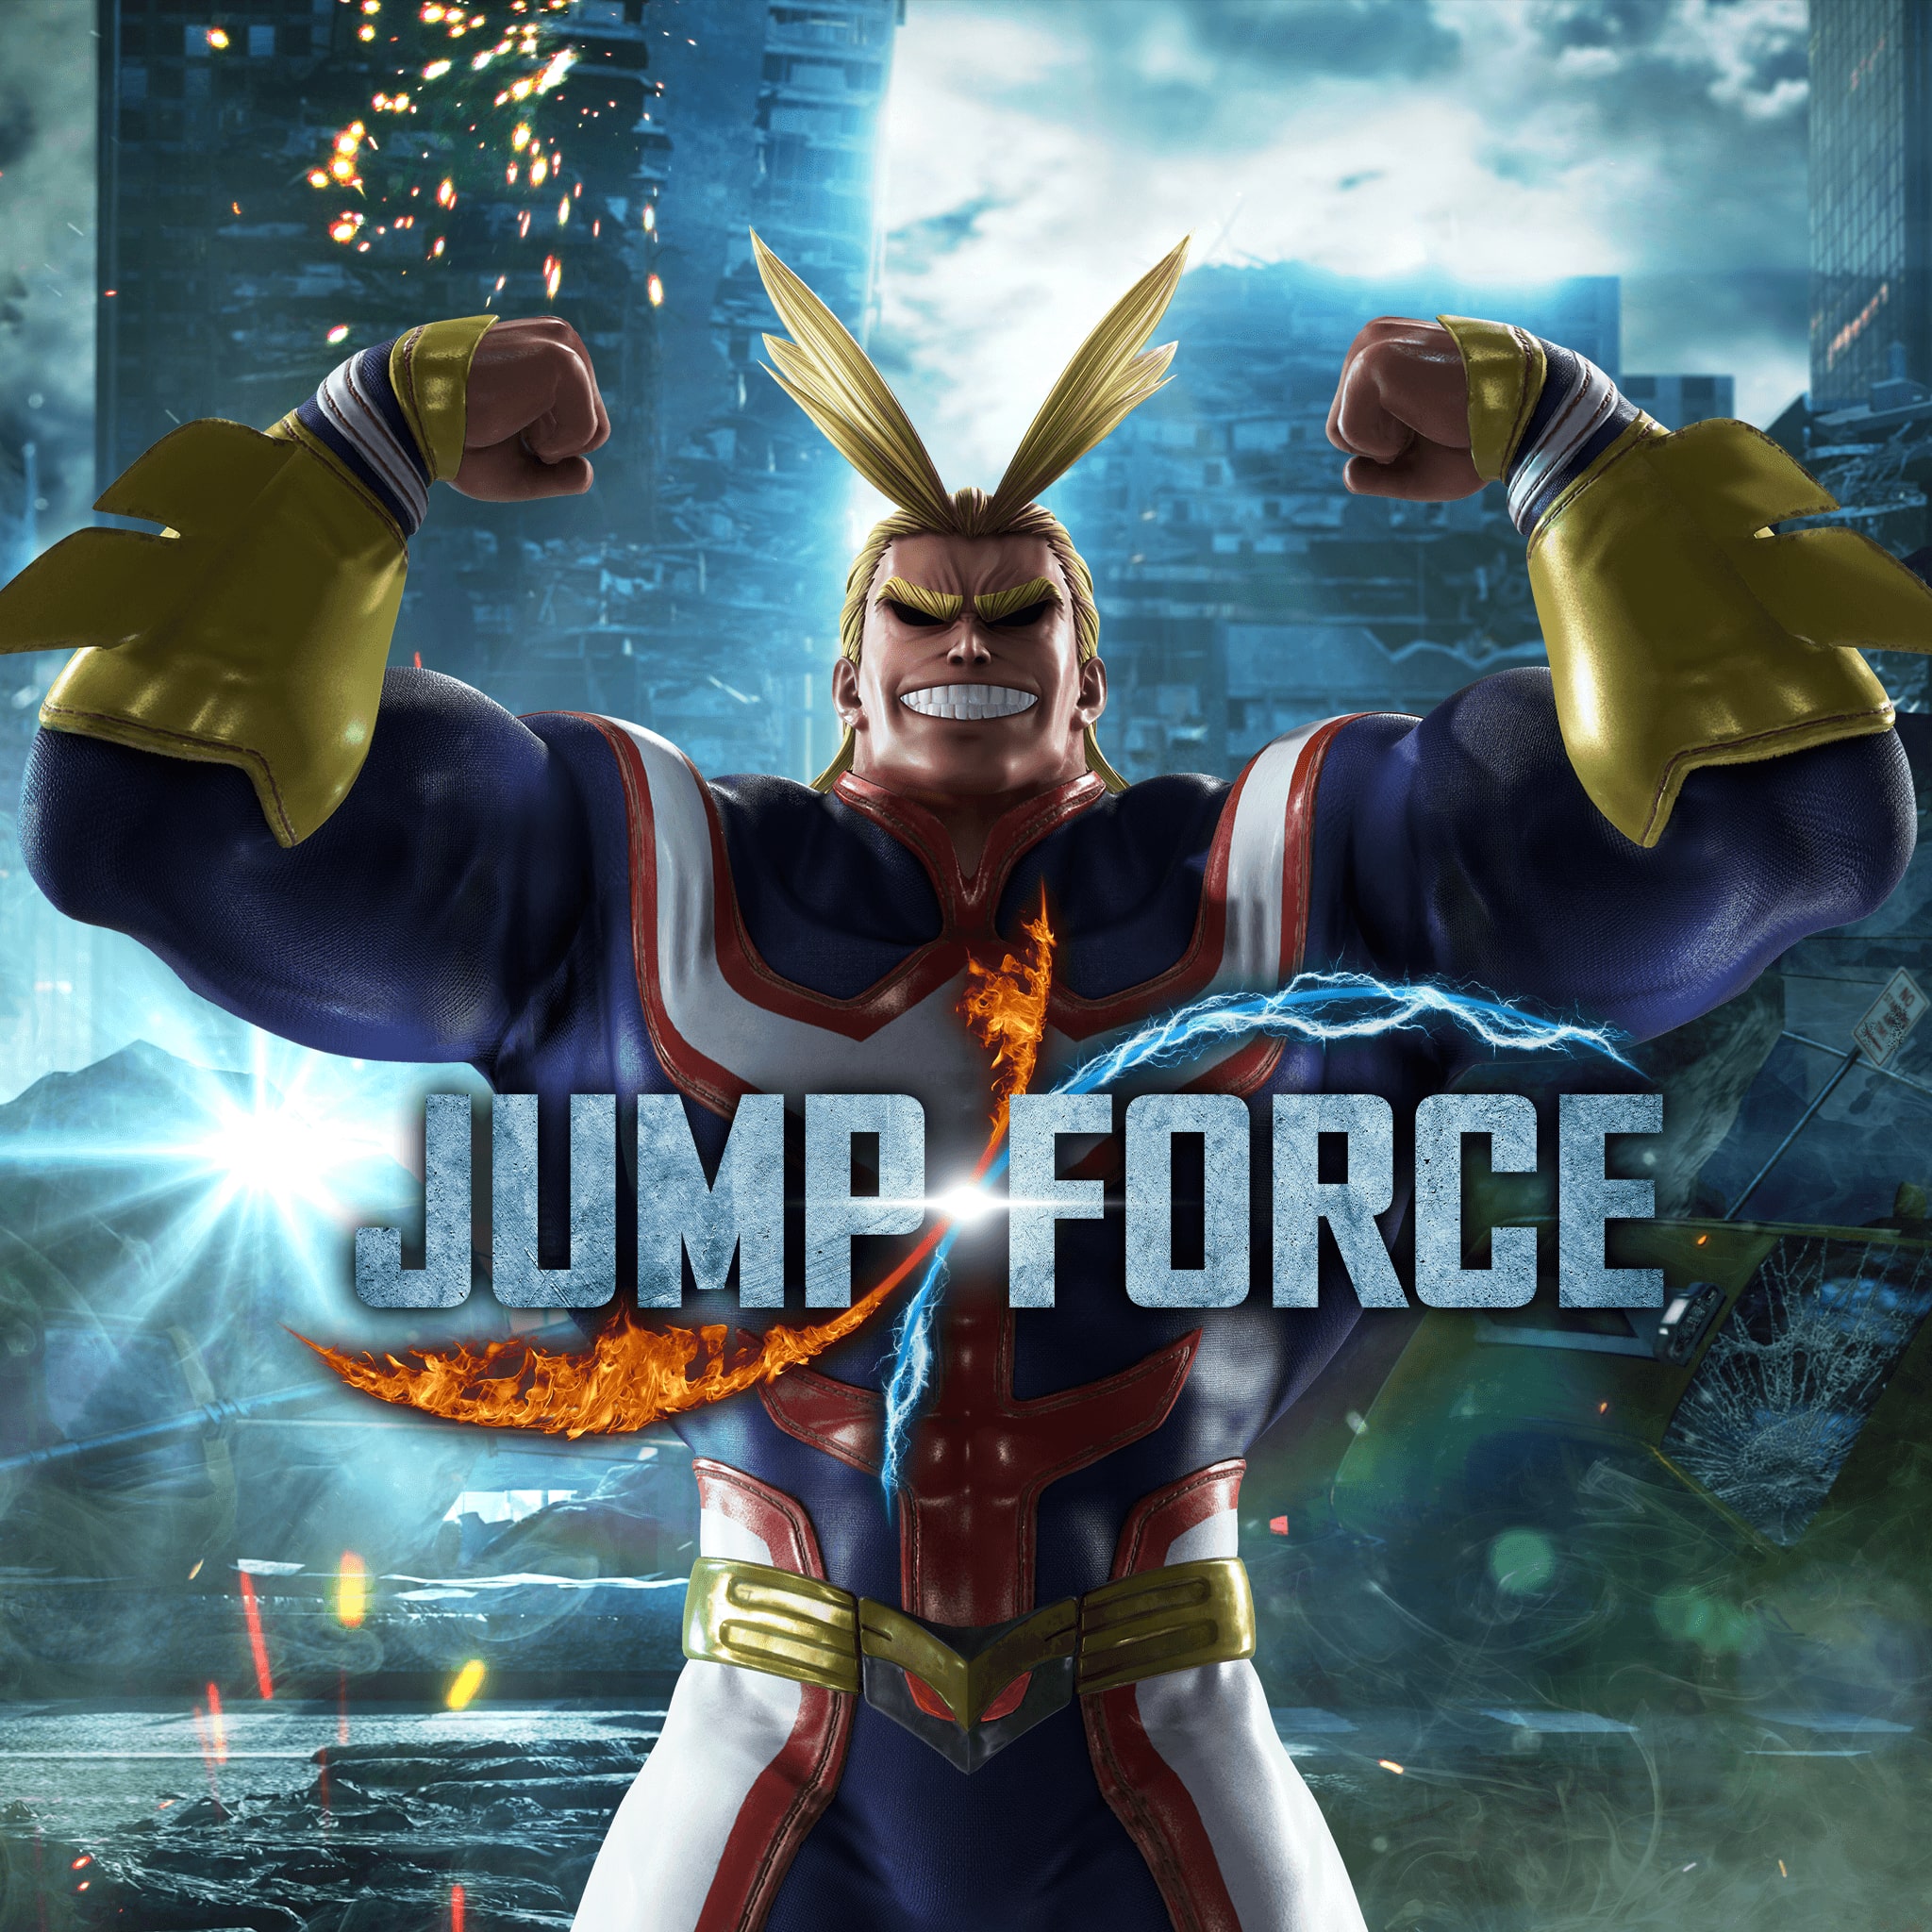 JUMP FORCE Character Pack 3: All Might